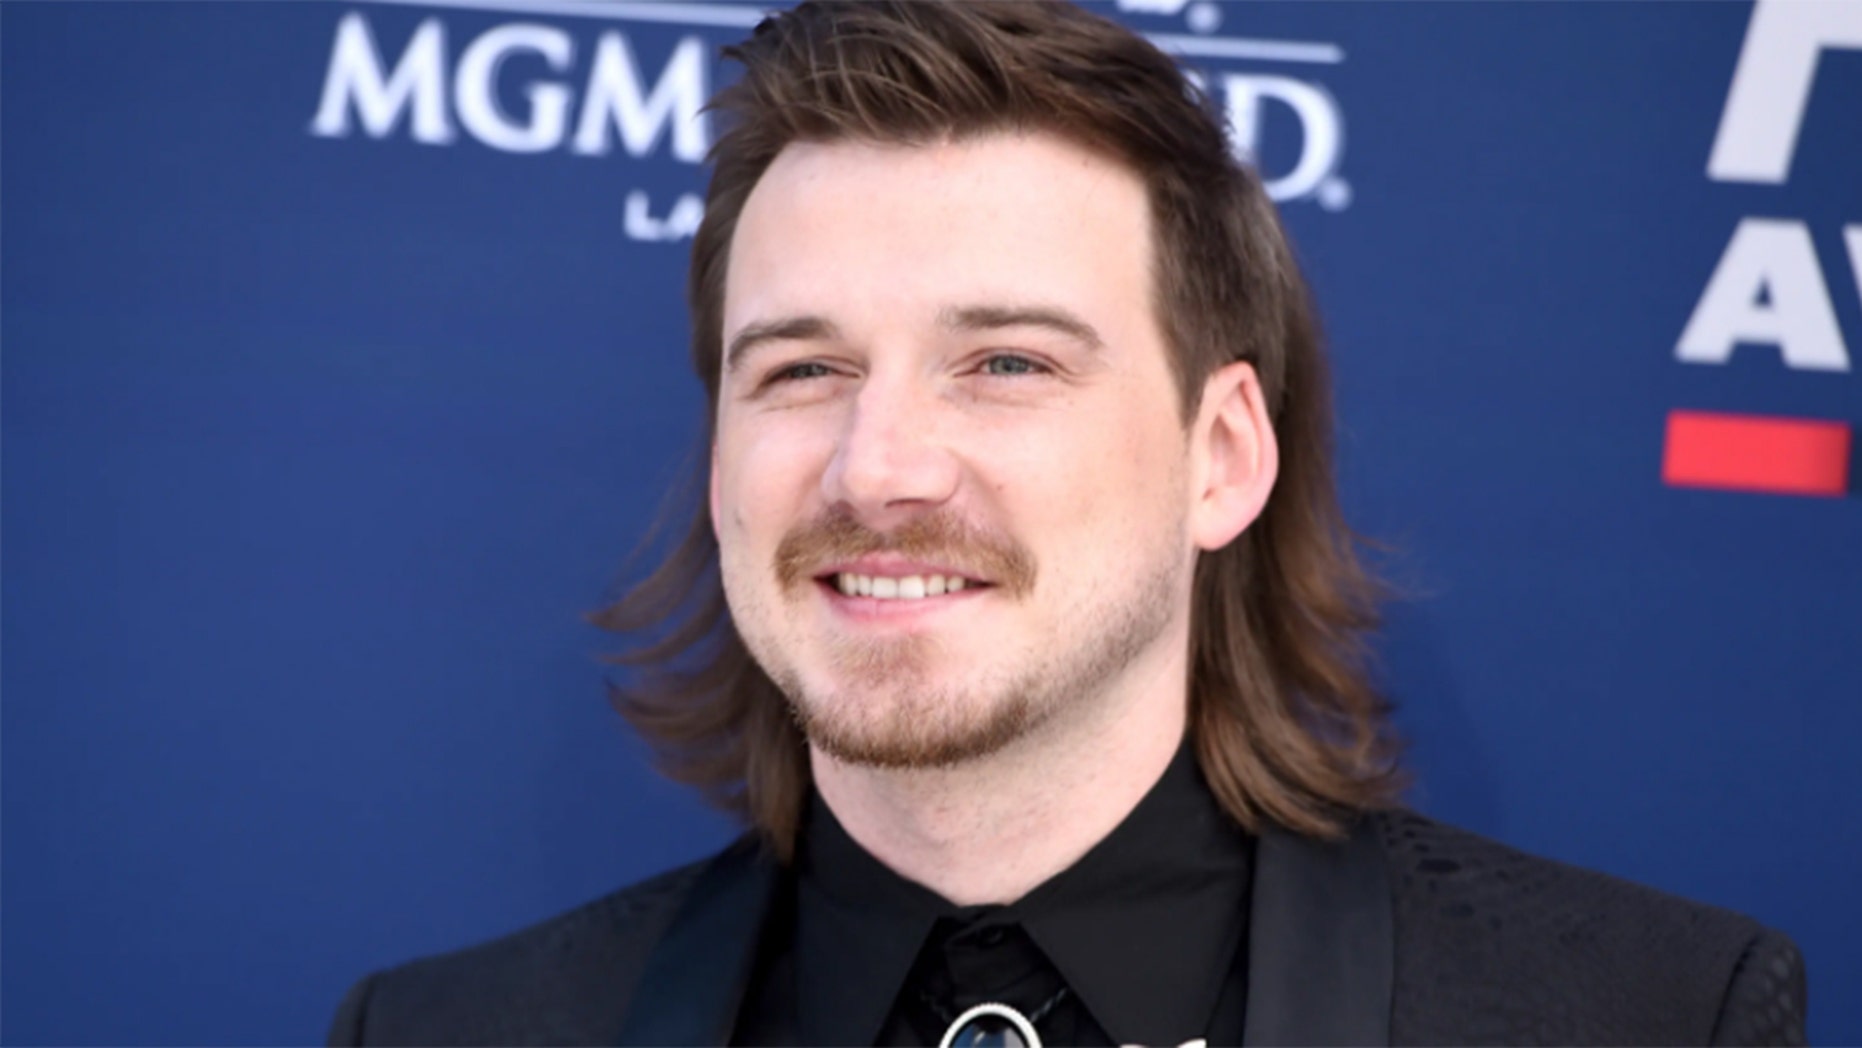 Morgan Wallen's crowd chants 'Let's Go, Brandon' at packed Madison Square Garden show